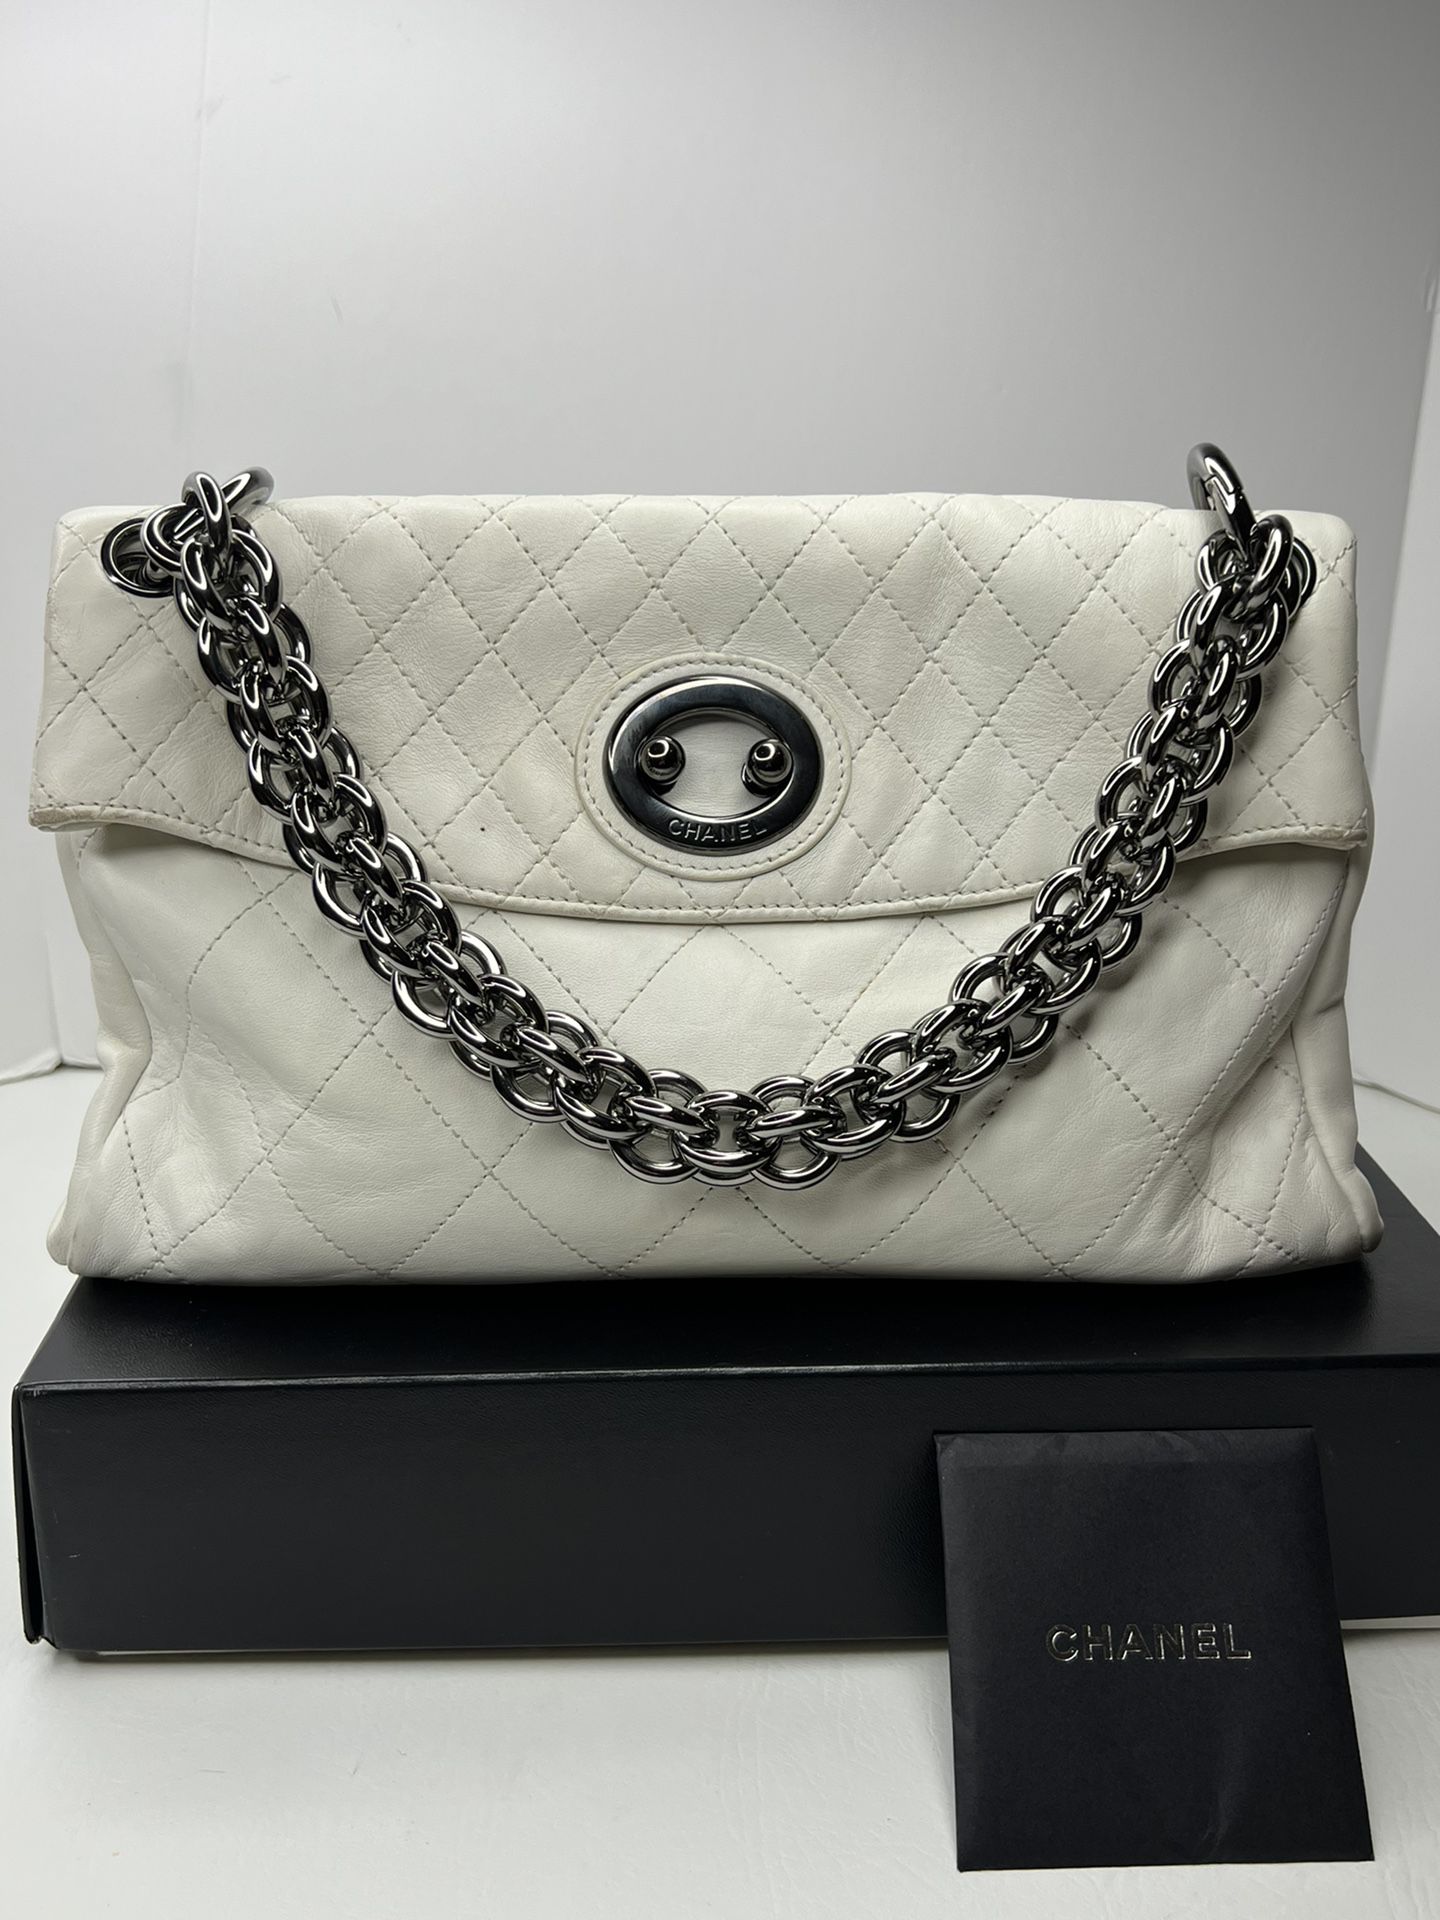 Authentic Chanel vintage white fold over stitched hobo bag with thick chain